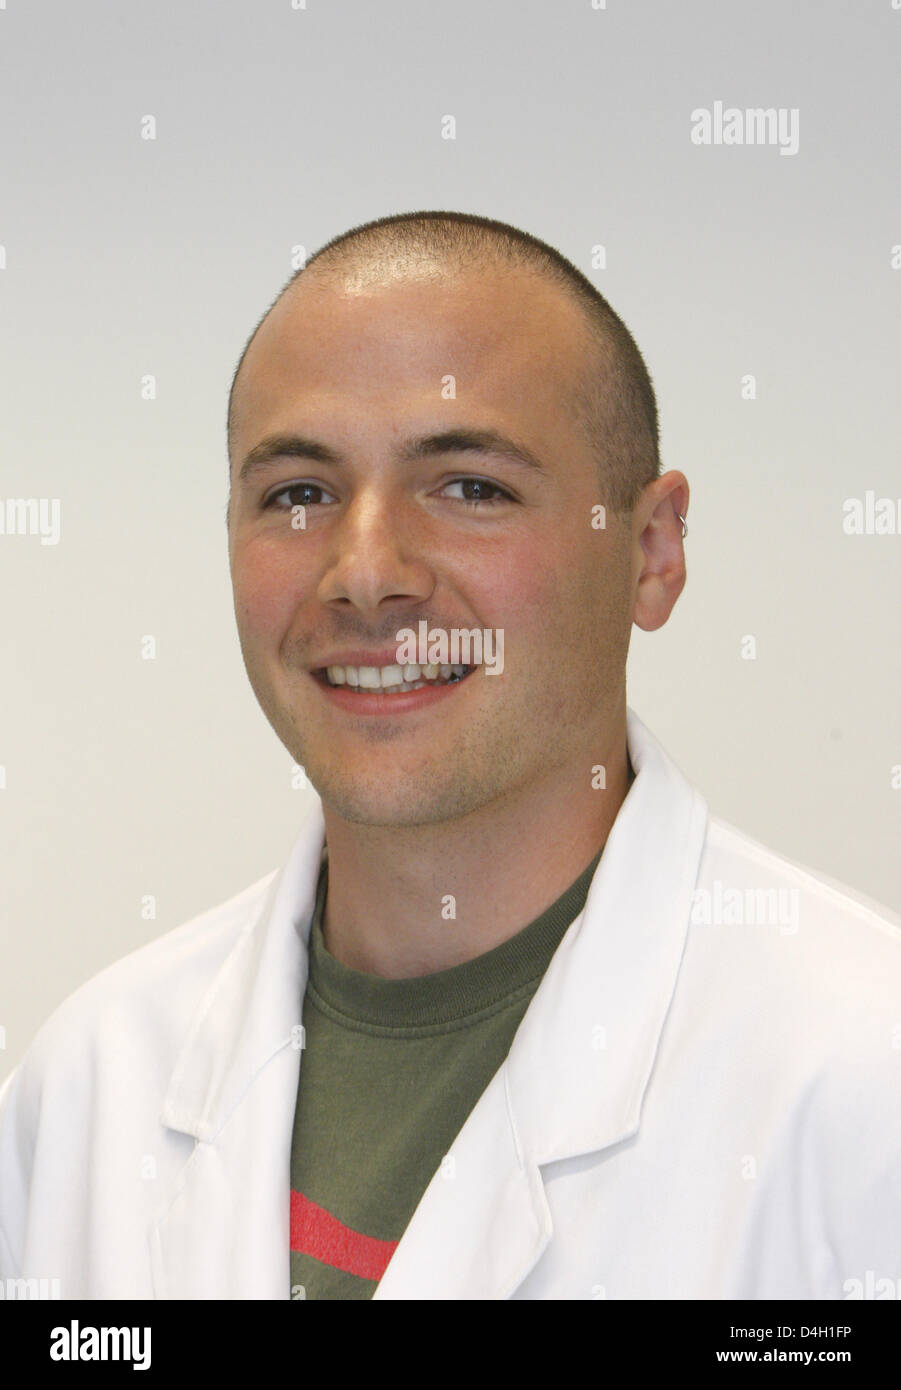 Scientist Michael Schindler (30) seen in his laboratory at 'Heinrich-Pette-Institut' in Hamburg, Germany, 14 July 2008. Schindler's team explores a protein which protects SIV - HIV's parent virus - infected apes from AIDS sickness. Photo: Marcus Brandt Stock Photo